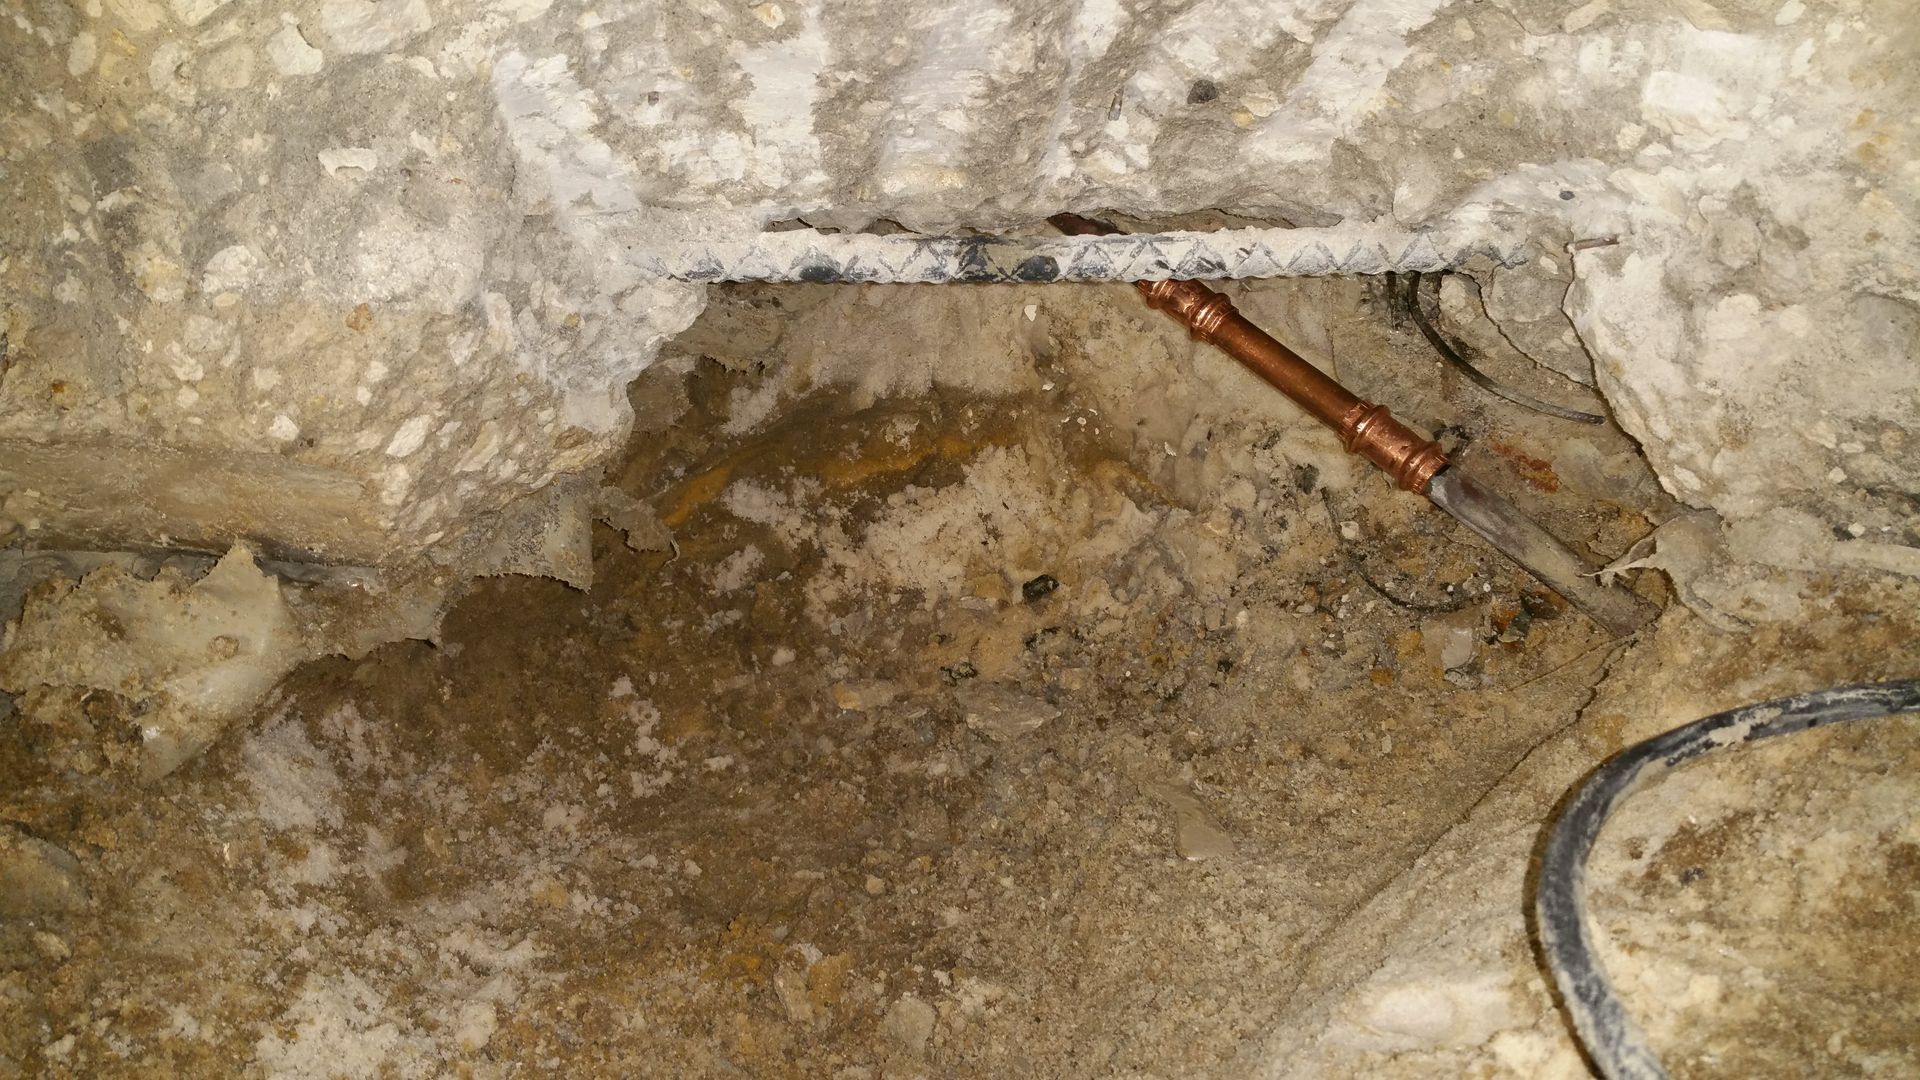 WATER LEAK DETECTION AND WATER LEAK REPAIRS, WE WILL ALSO POUR BACK CONCRETE FLOOR REMOVED TO MAKE THE WATER PIPE REPAIR Melbourne FL